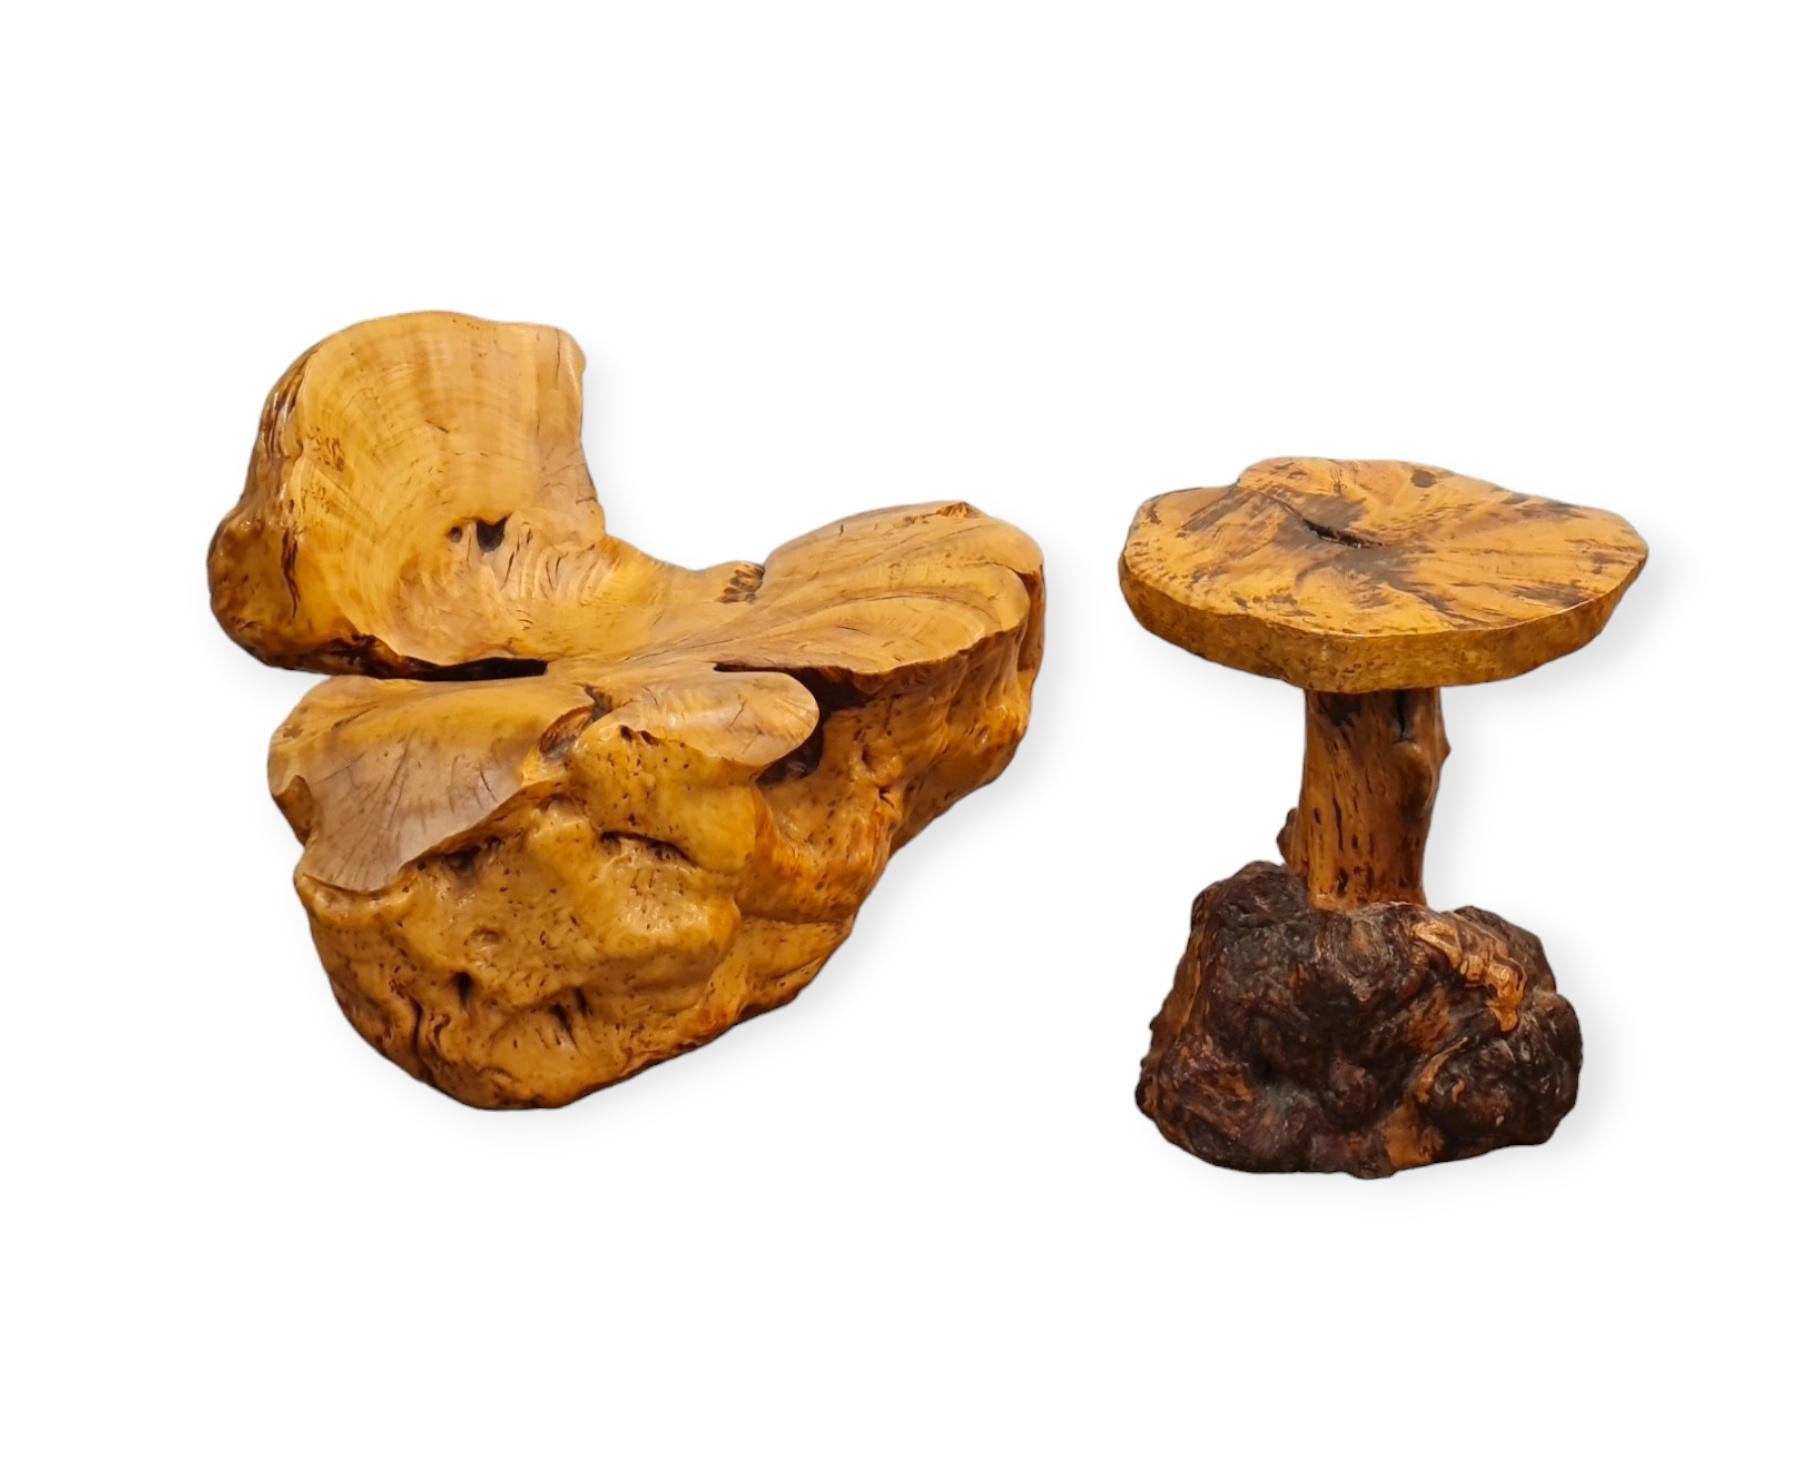 This set of hand-made burl chair and small table are definitely unique and made by a highly skilled country craftsman. We run into these sort of furnitures every now and then in Finland, especially in the country side.

Lately these sorts of